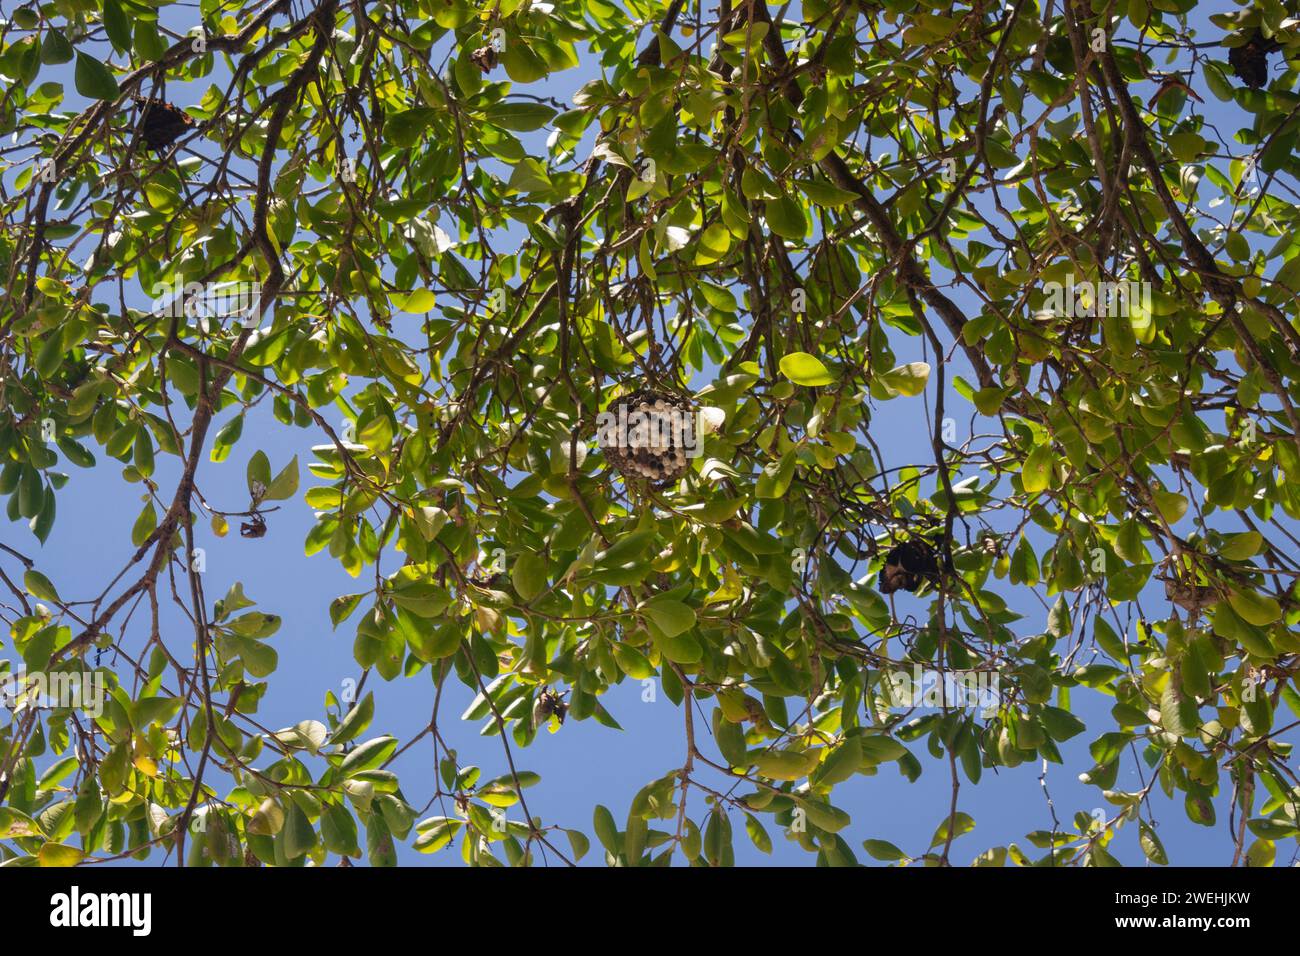 A wasp nest on a tree tropical jungle branches looking from below with blue sky at background into colombian tayrona national park Stock Photo